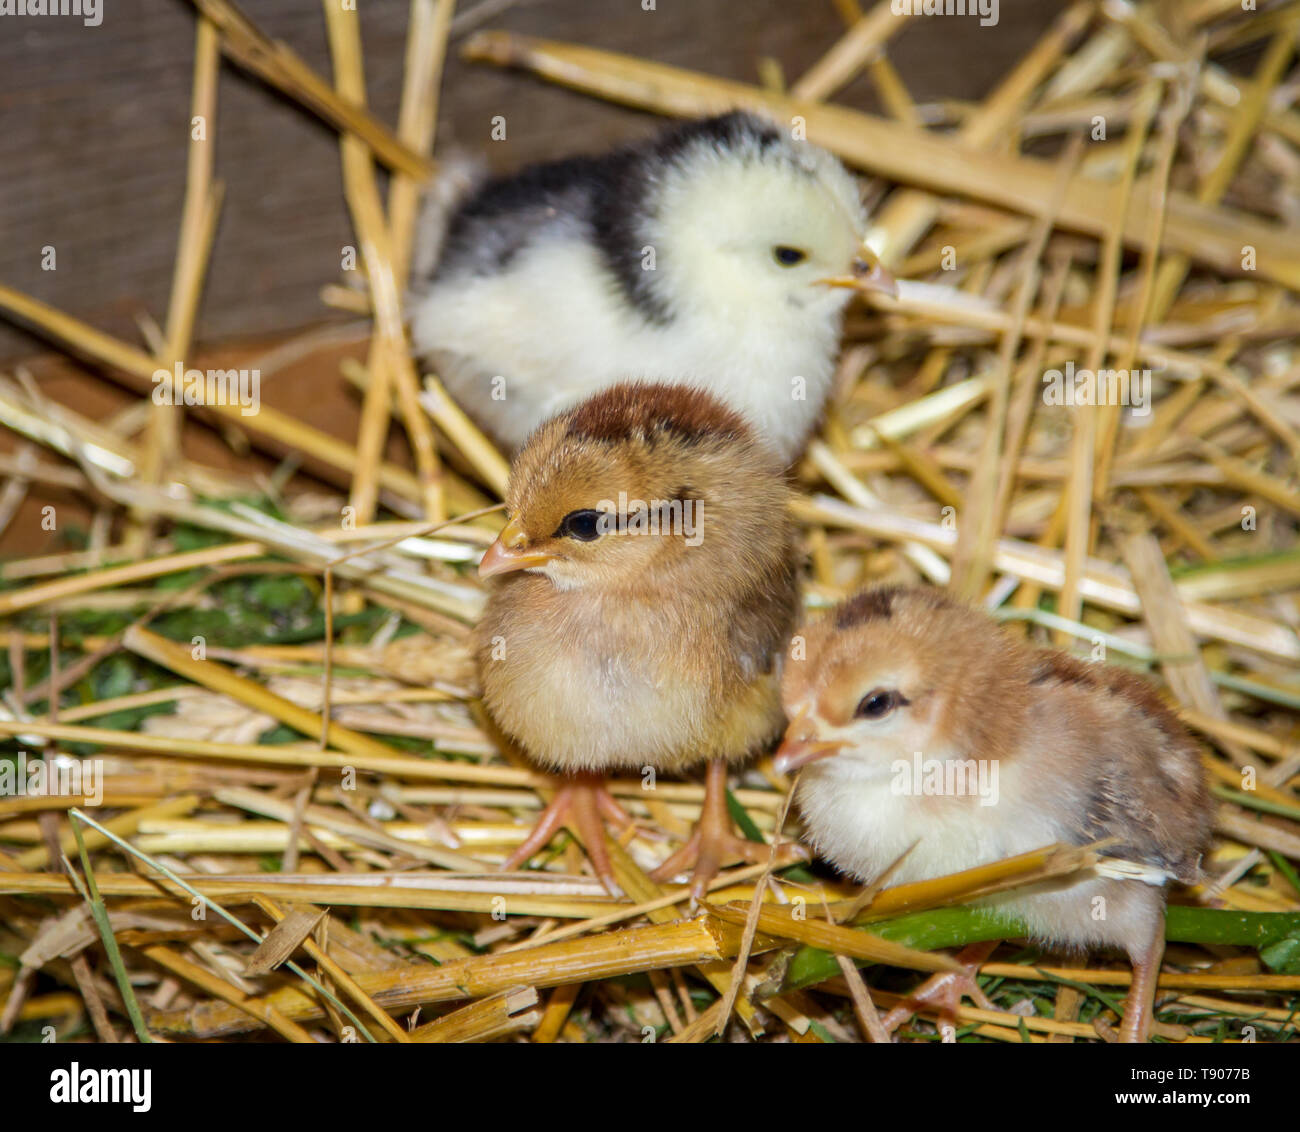 Stoapiperl, Steinhendl - fledglings - critically endangered chicken breed from Austria Stock Photo